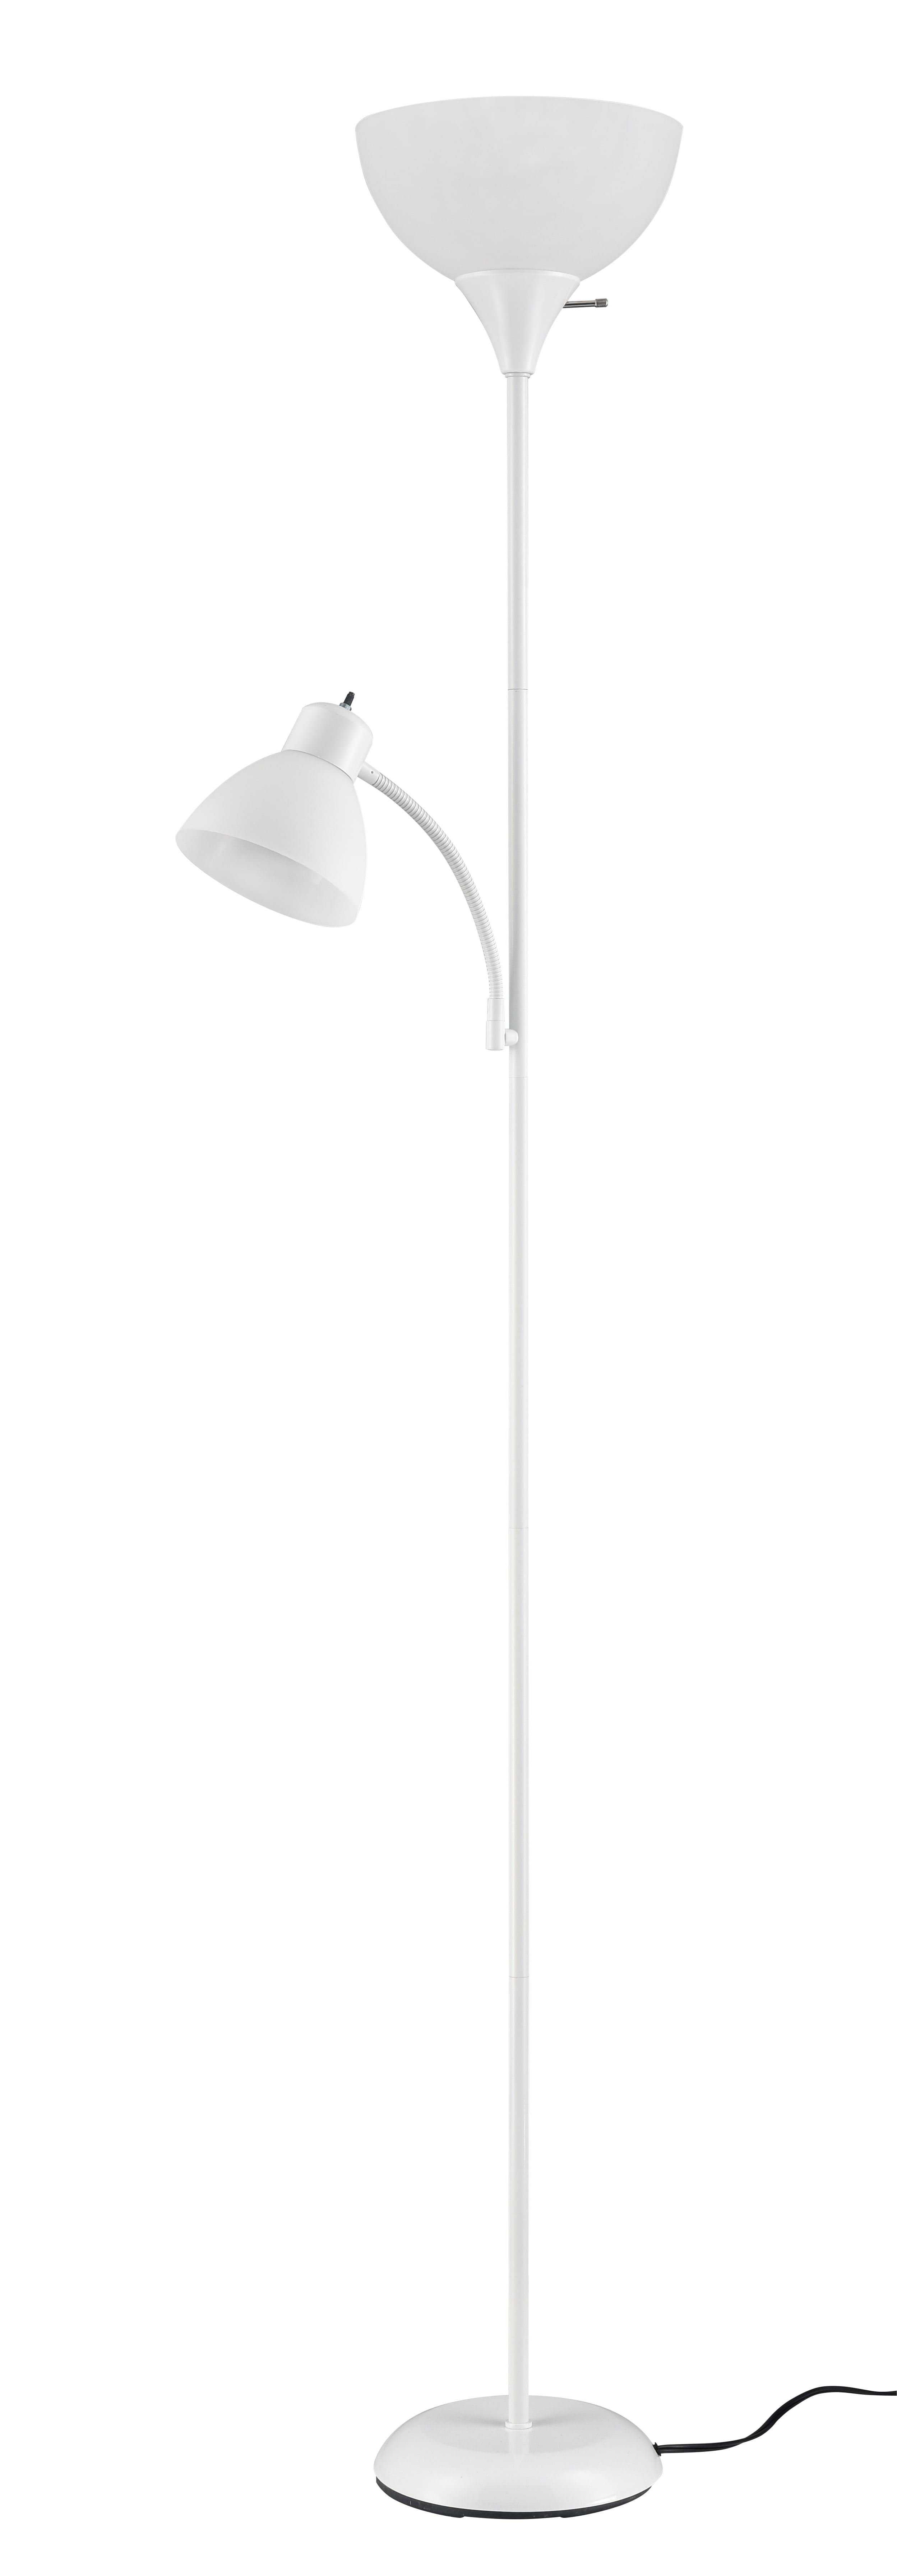 Mainstays 72" Combo Floor Lamp, Adjustable Reading Light, White, Plastic, Modern, Young Adult, Adult use.